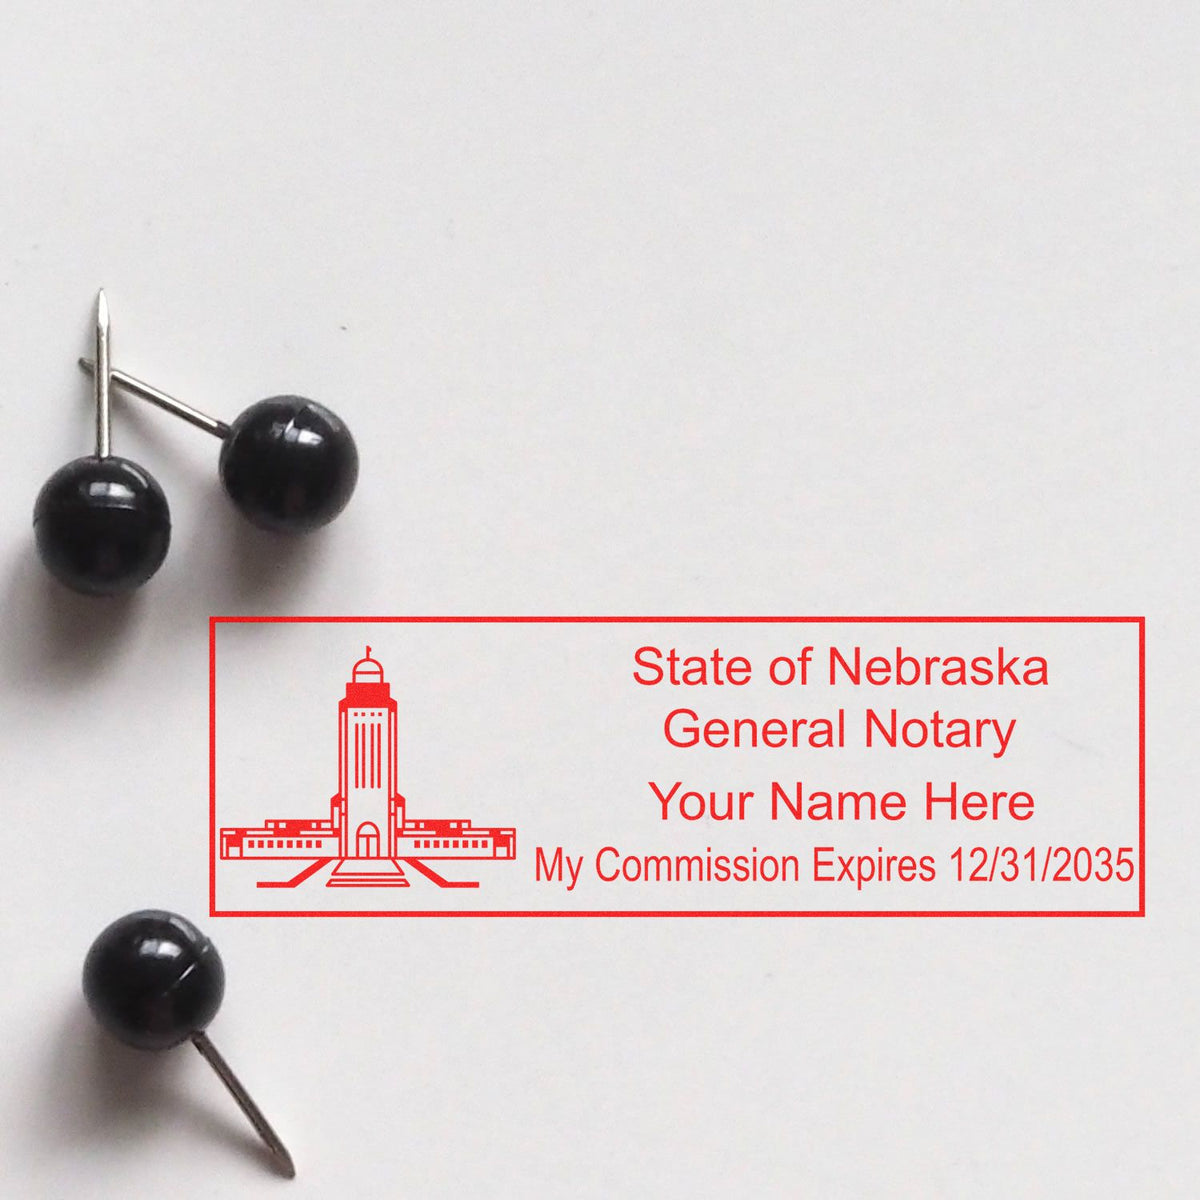 Another Example of a stamped impression of the Super Slim Nebraska Notary Public Stamp on a piece of office paper.